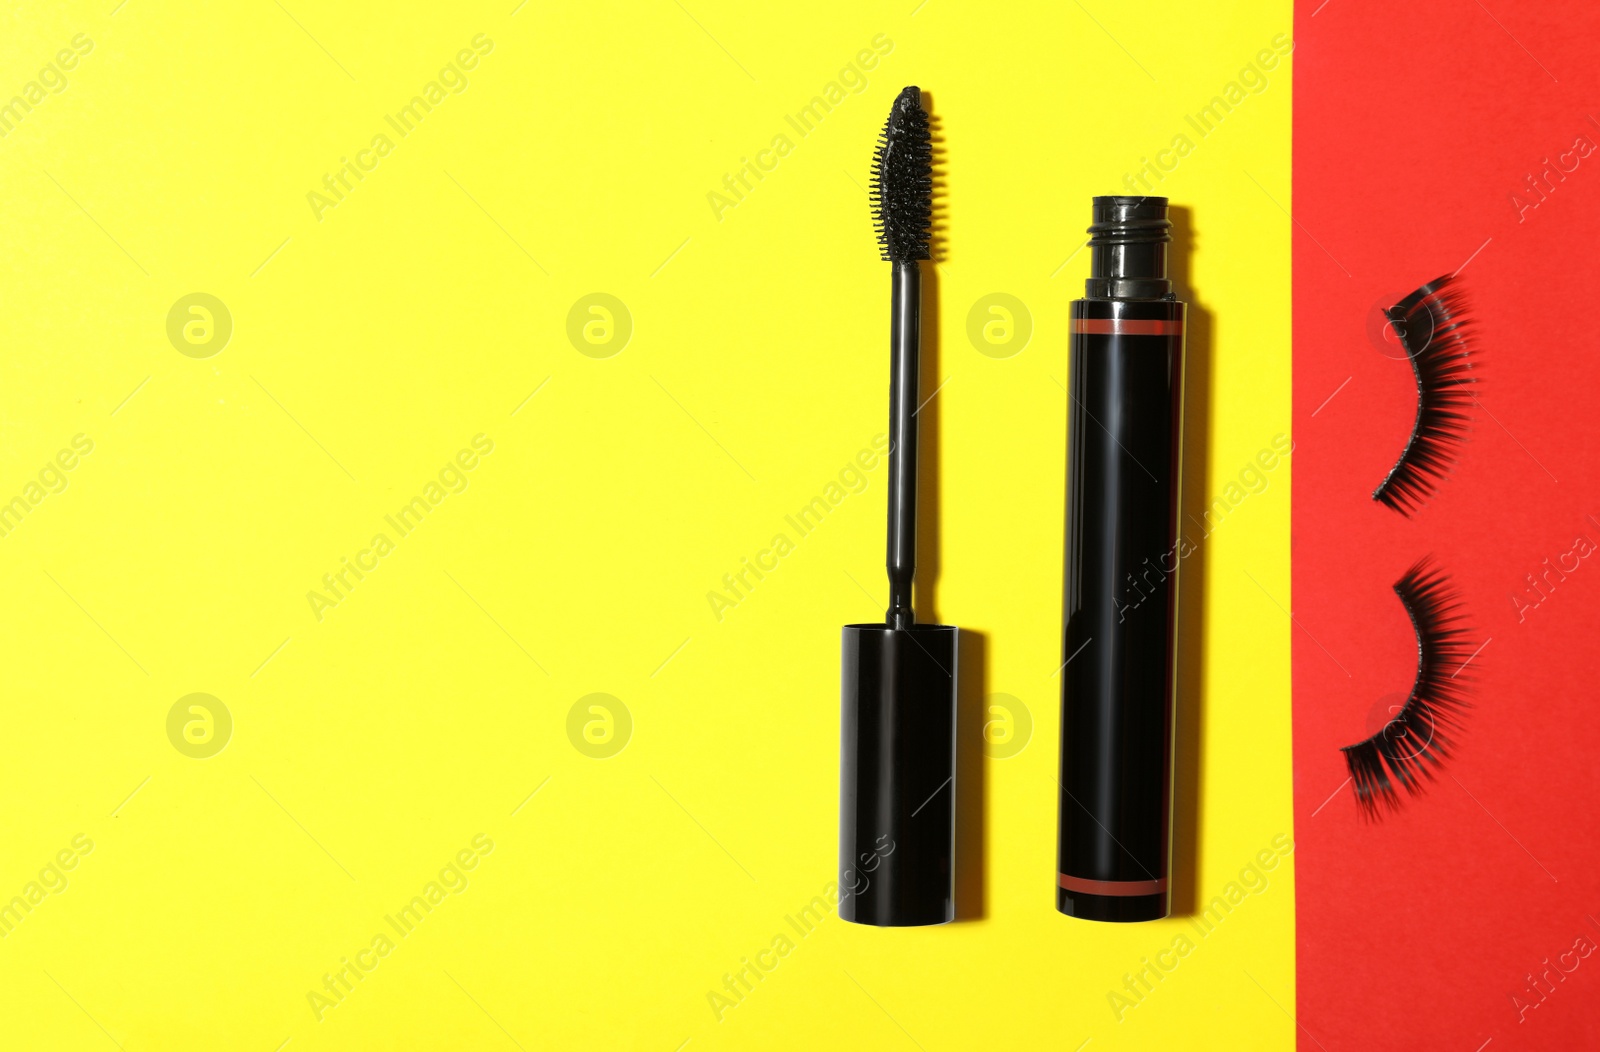 Photo of Black mascara and fake eyelashes on color background, flat lay with space for text. Makeup product